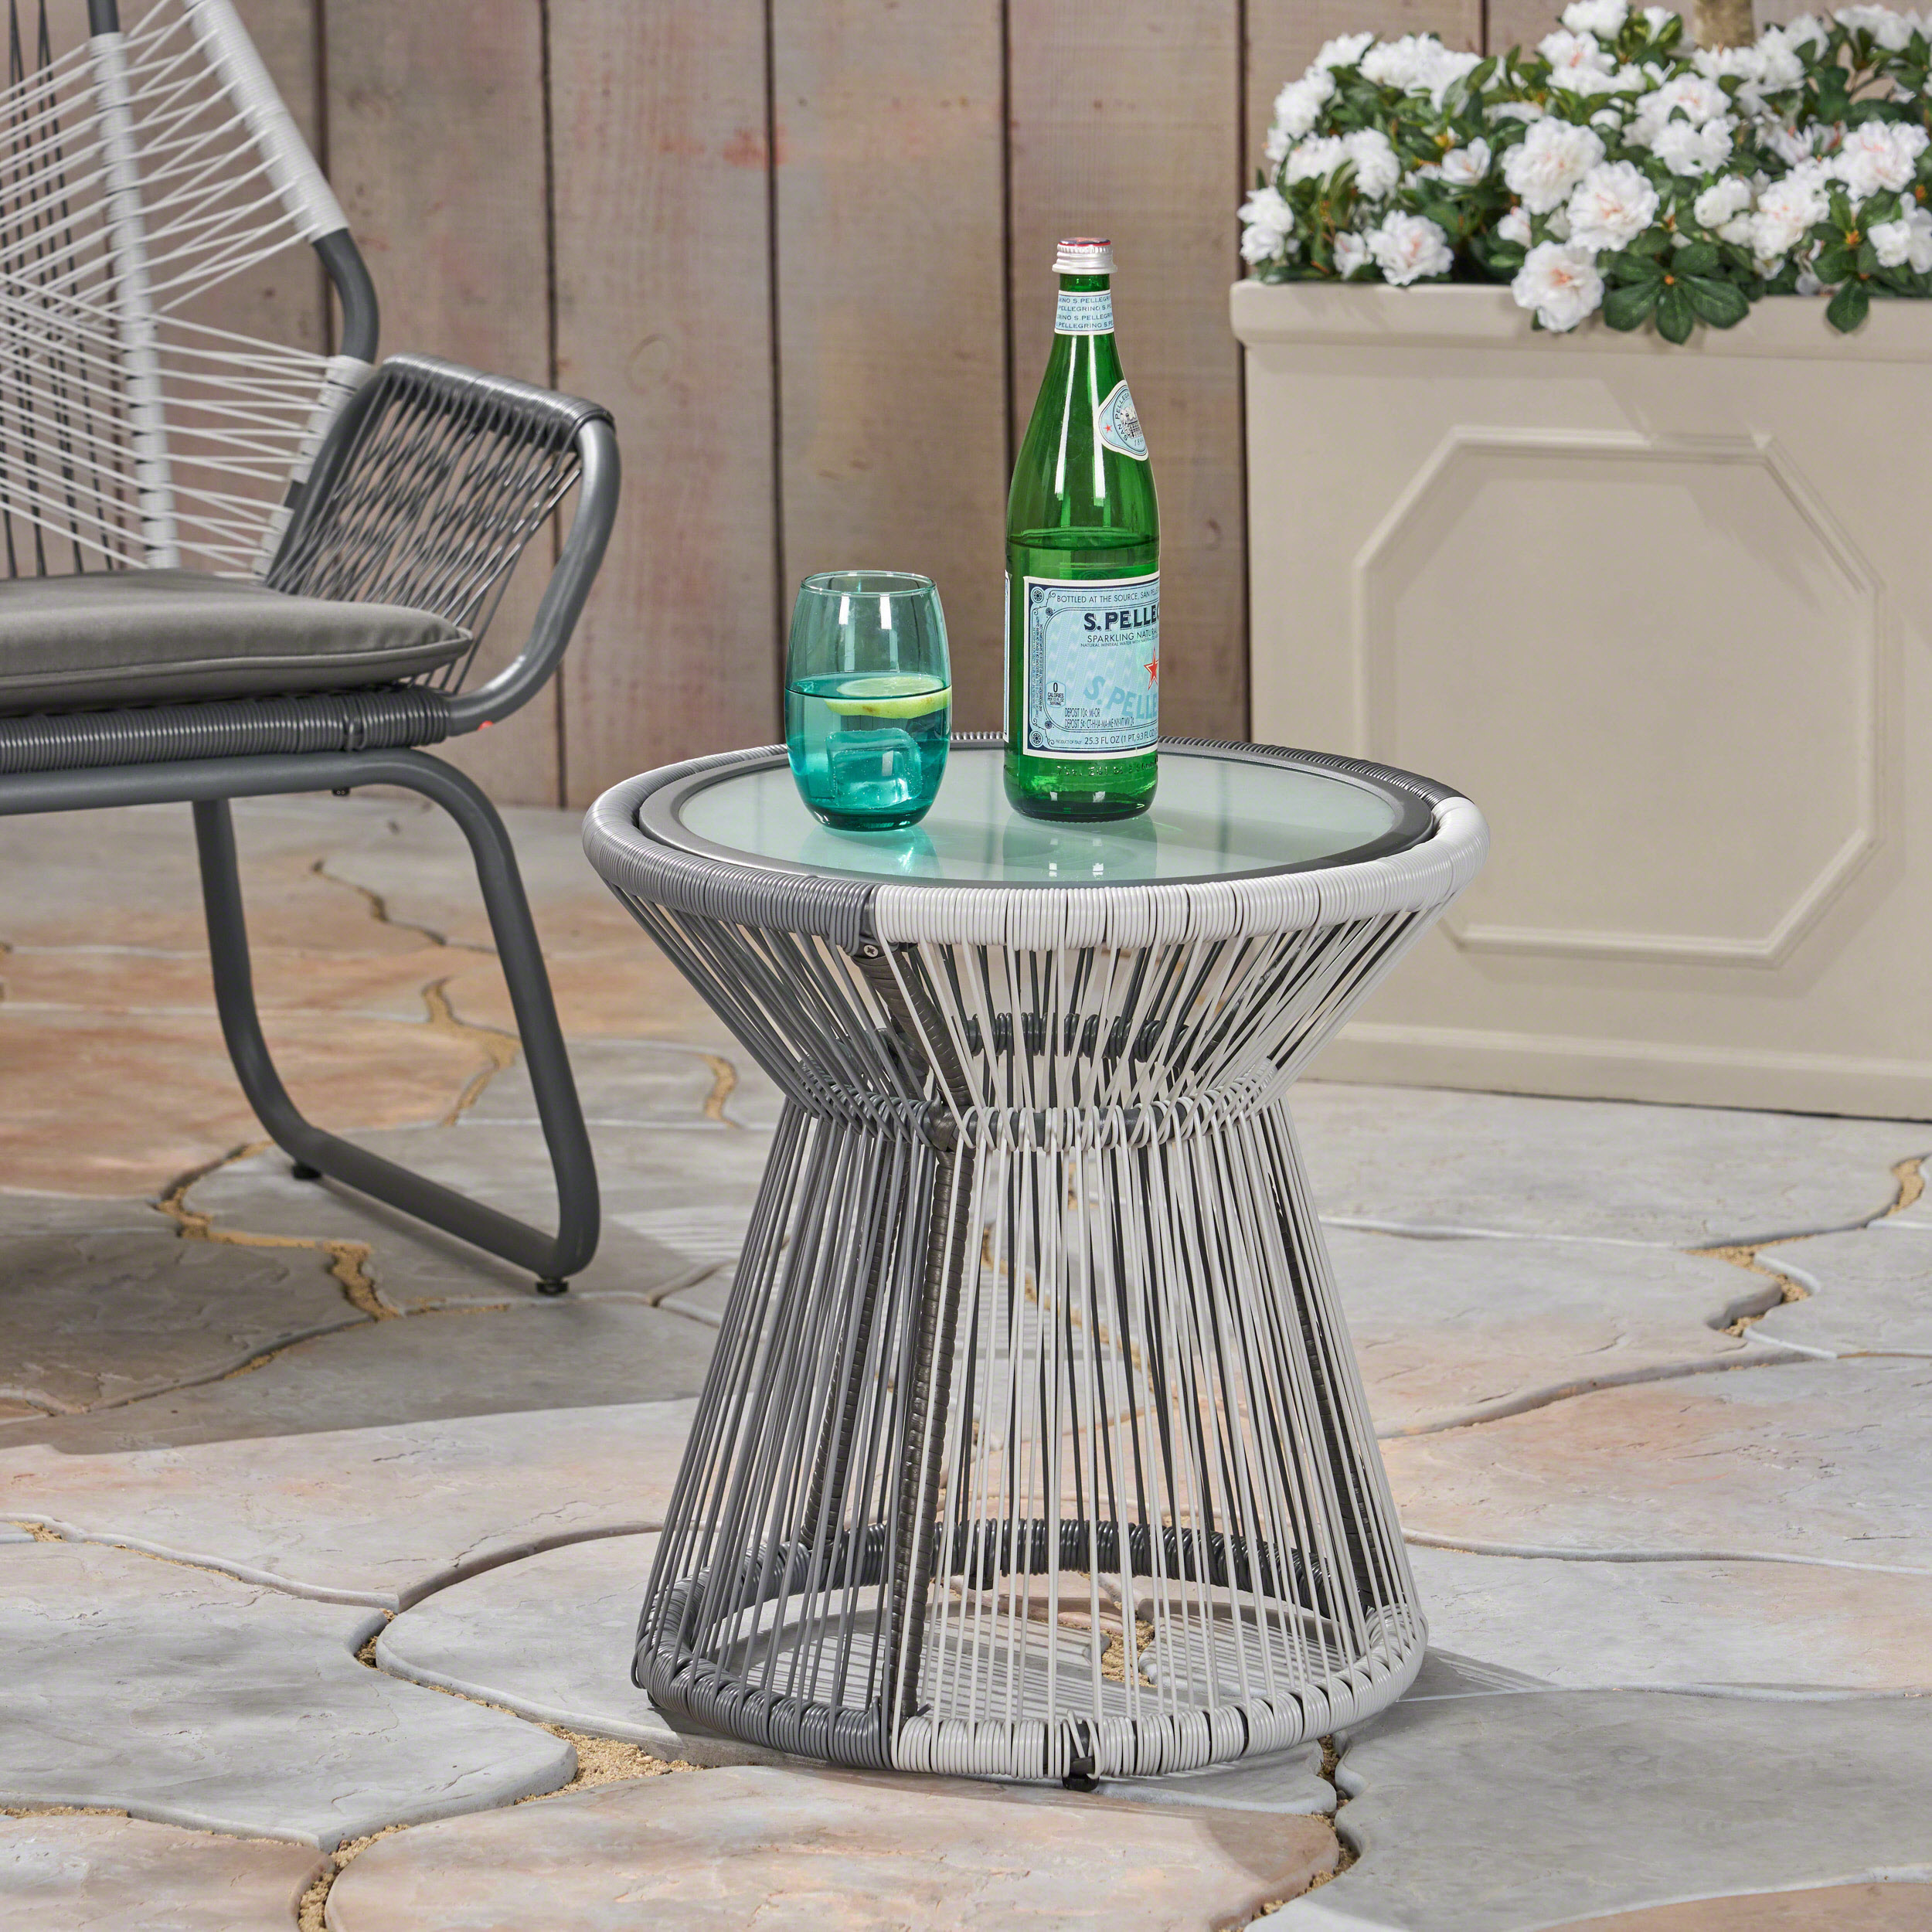 Reid Outdoor Wicker Side Table with Glass Top, Gray, White - image 1 of 5